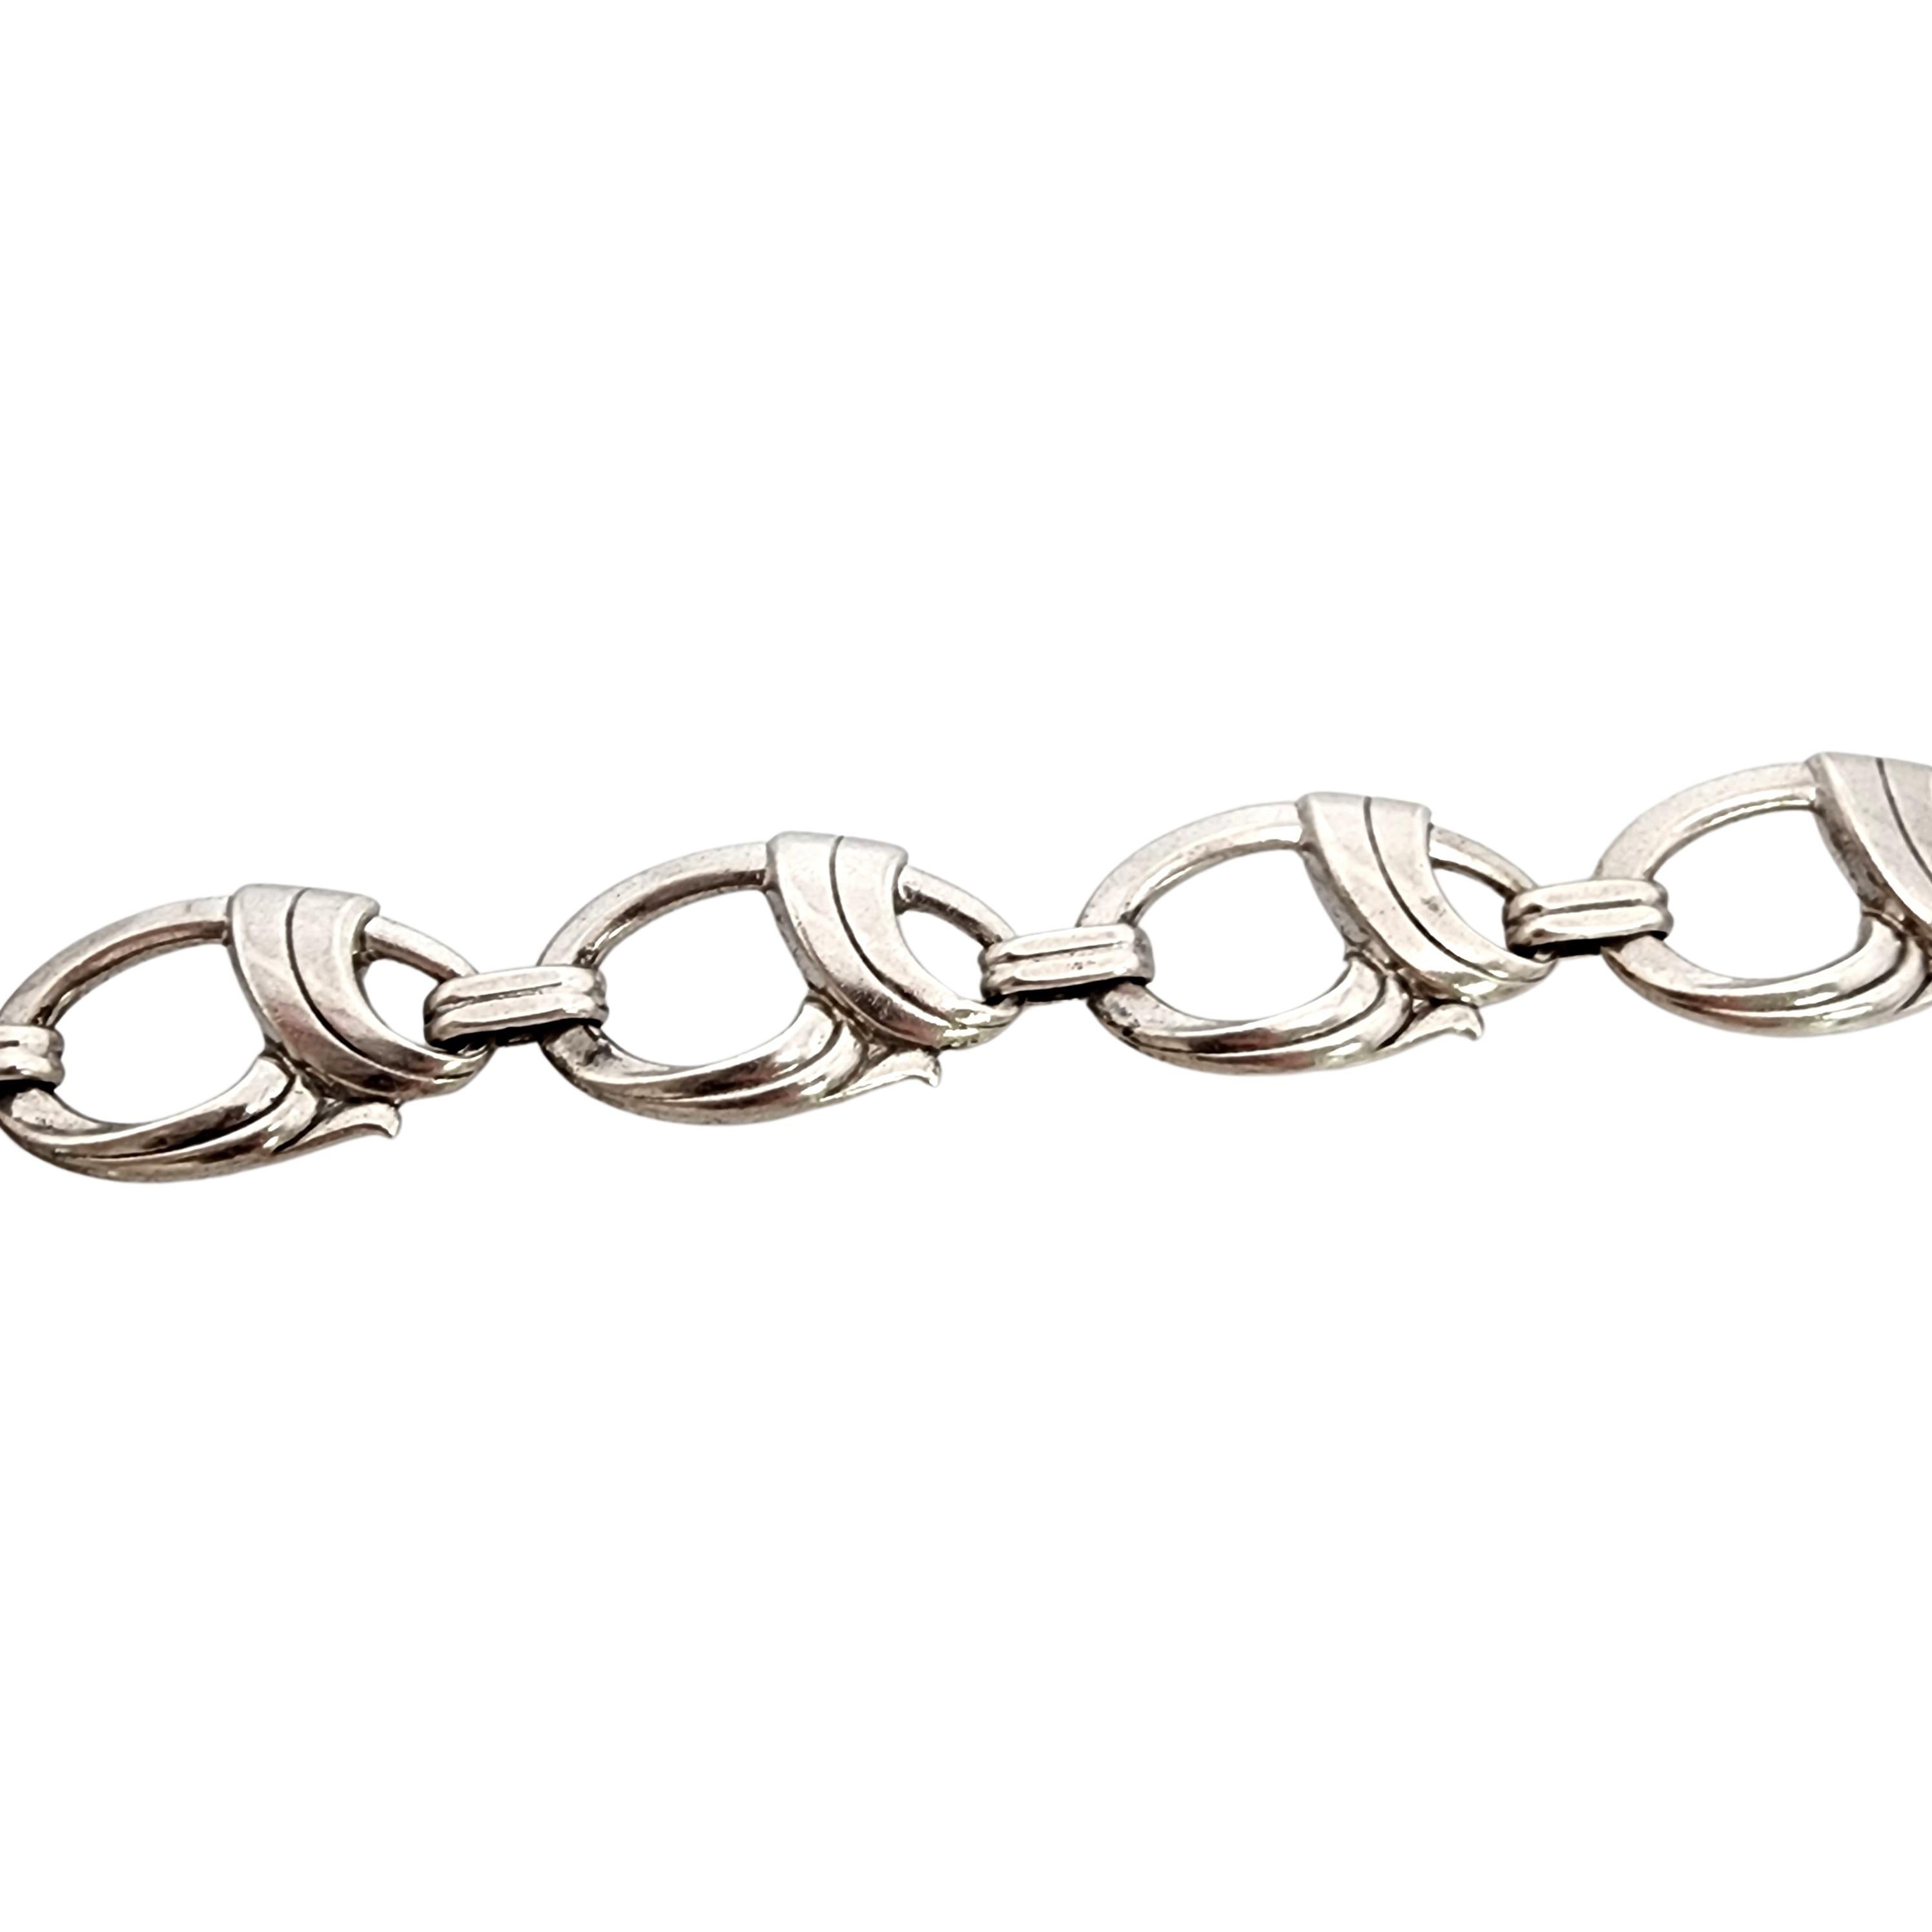 Harry S Bick HSB Sterling Silver Art Deco Link Bracelet #14460 In Good Condition For Sale In Washington Depot, CT